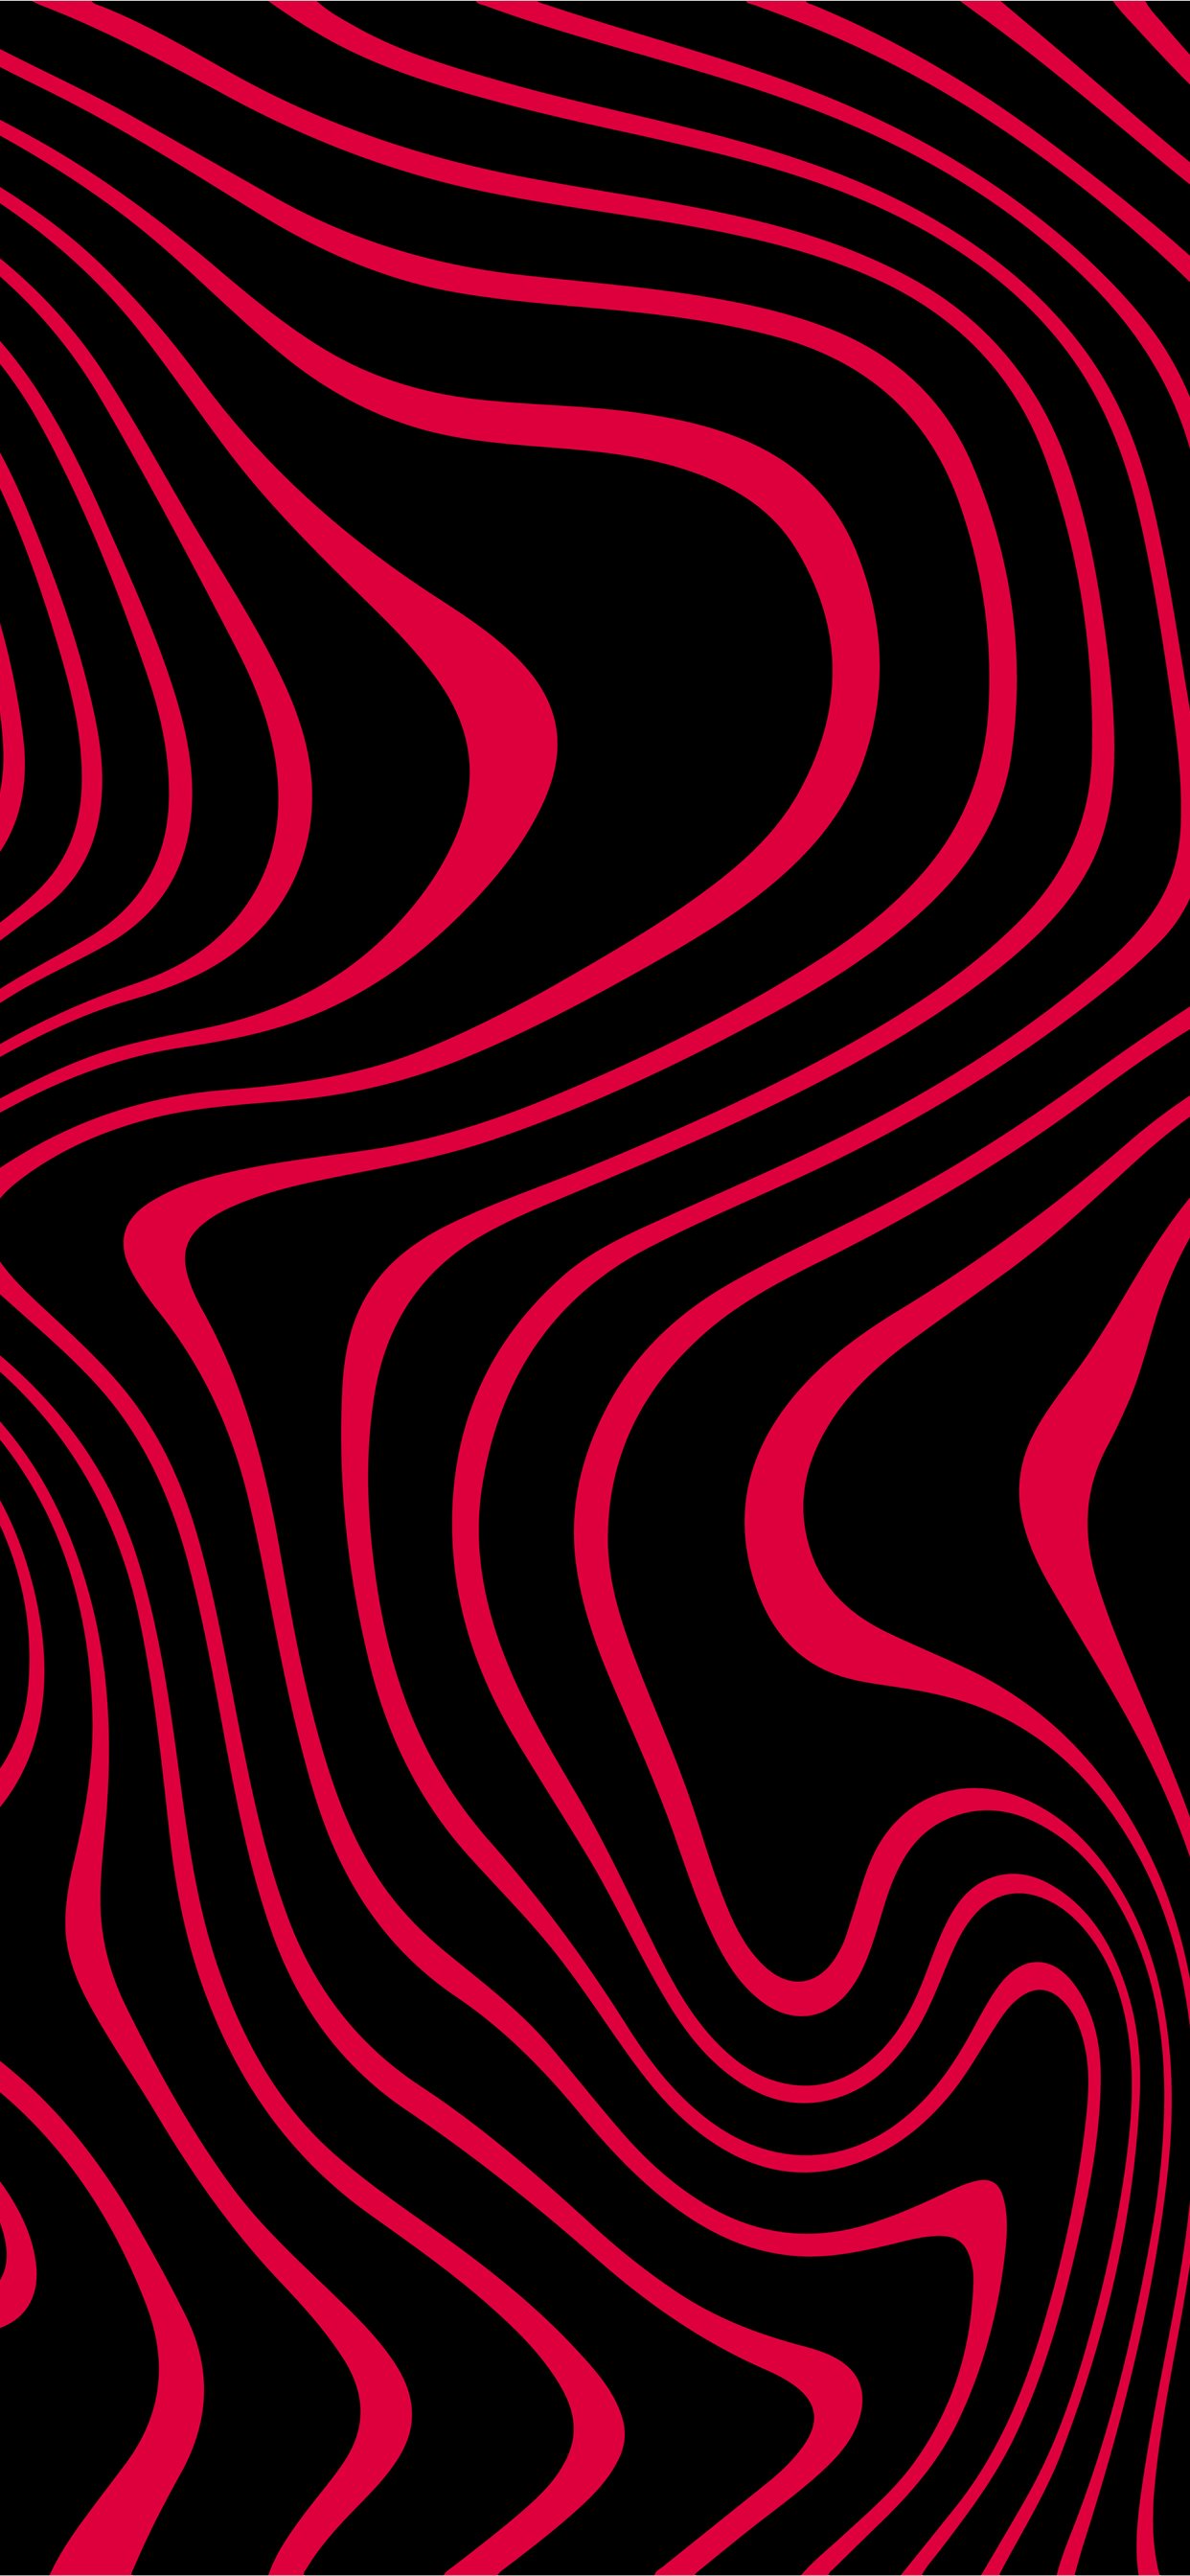 Red And Black Pewdiepie Backgrounds , HD Wallpaper & Backgrounds